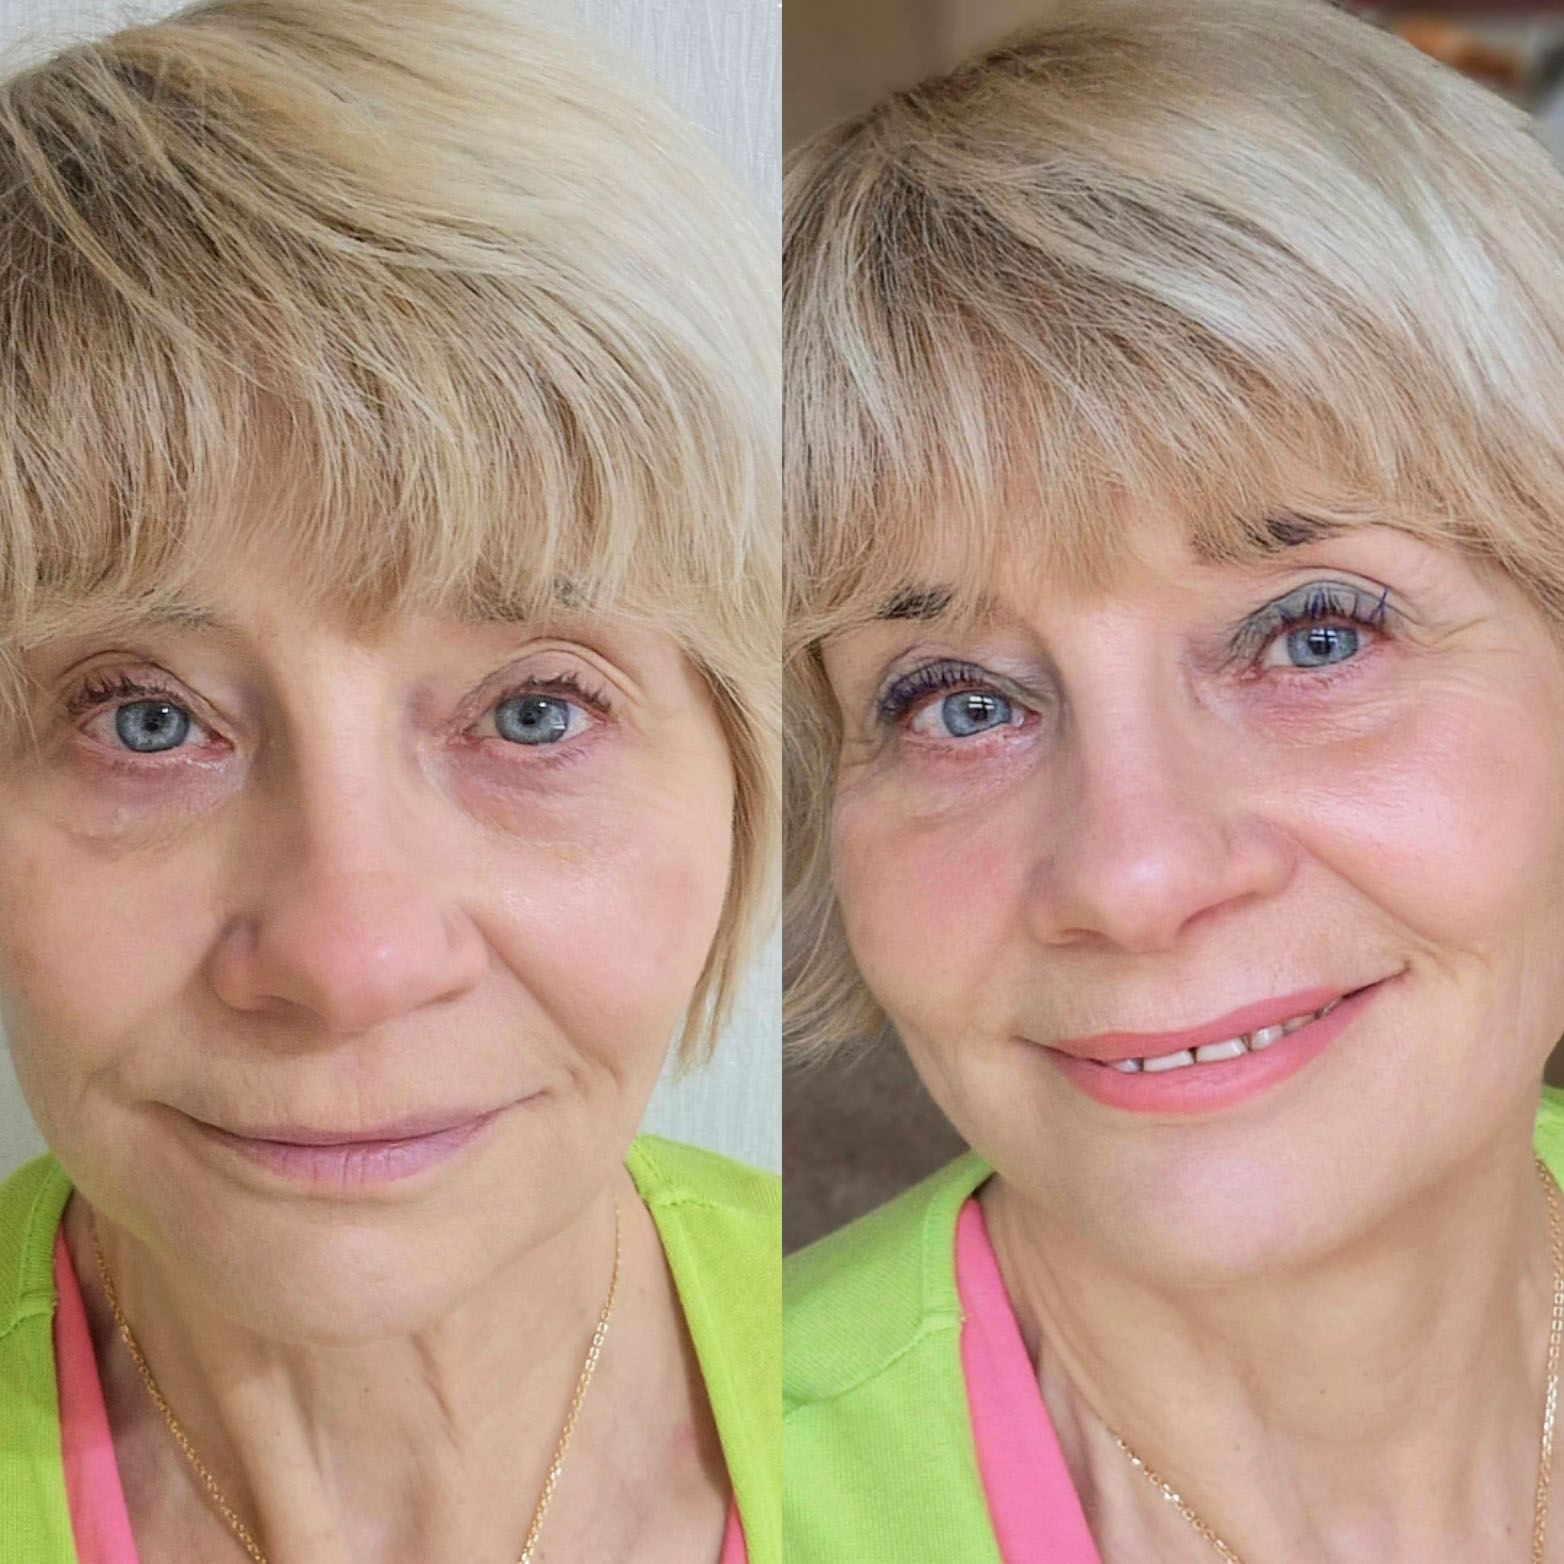 A Before and After: 62 year old woman's face before and after using make-up by Look Fabulous Forever